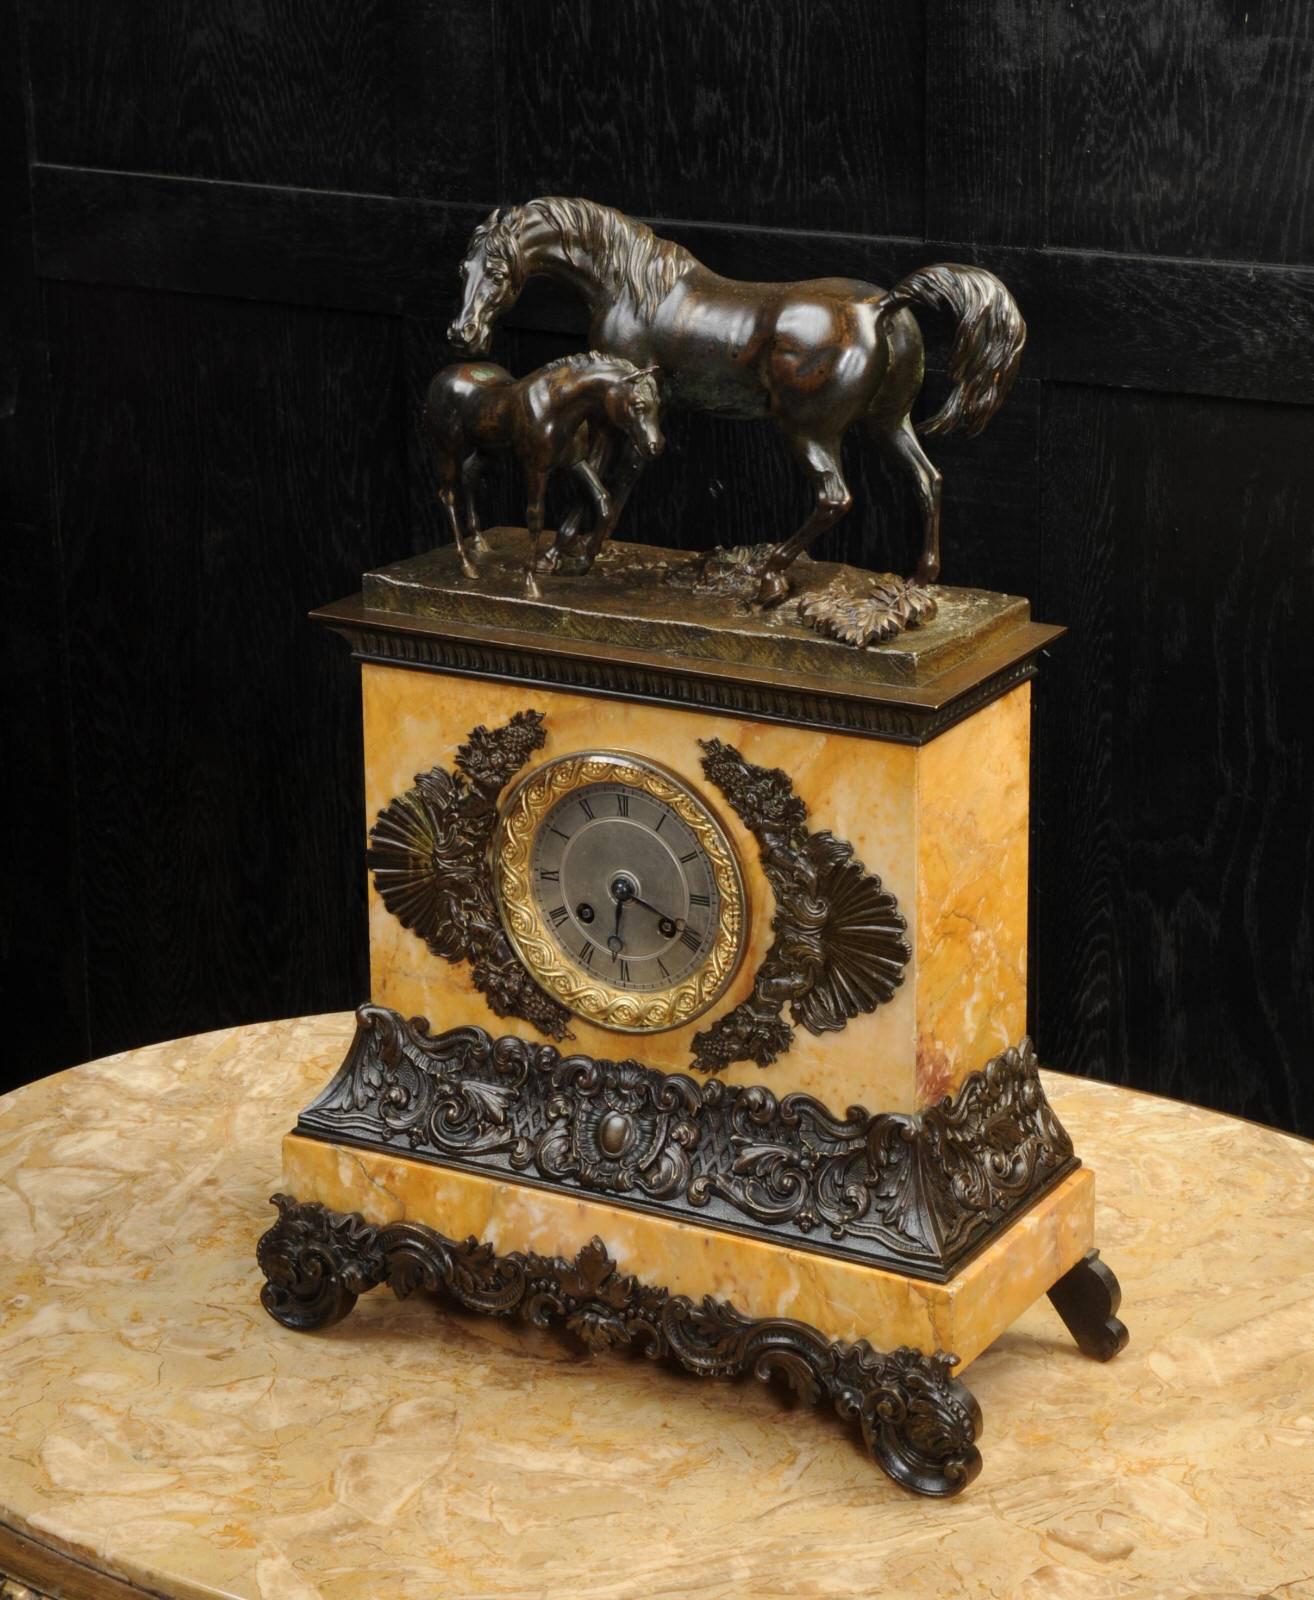 A beautiful, original and early clock depicting a mare tending her foal. Beautifully and delicately modelled in bronze, full of life and movement with a lovely antique patina. The clock is mounted in a Sienna marble plinth mounted with crisp bronze